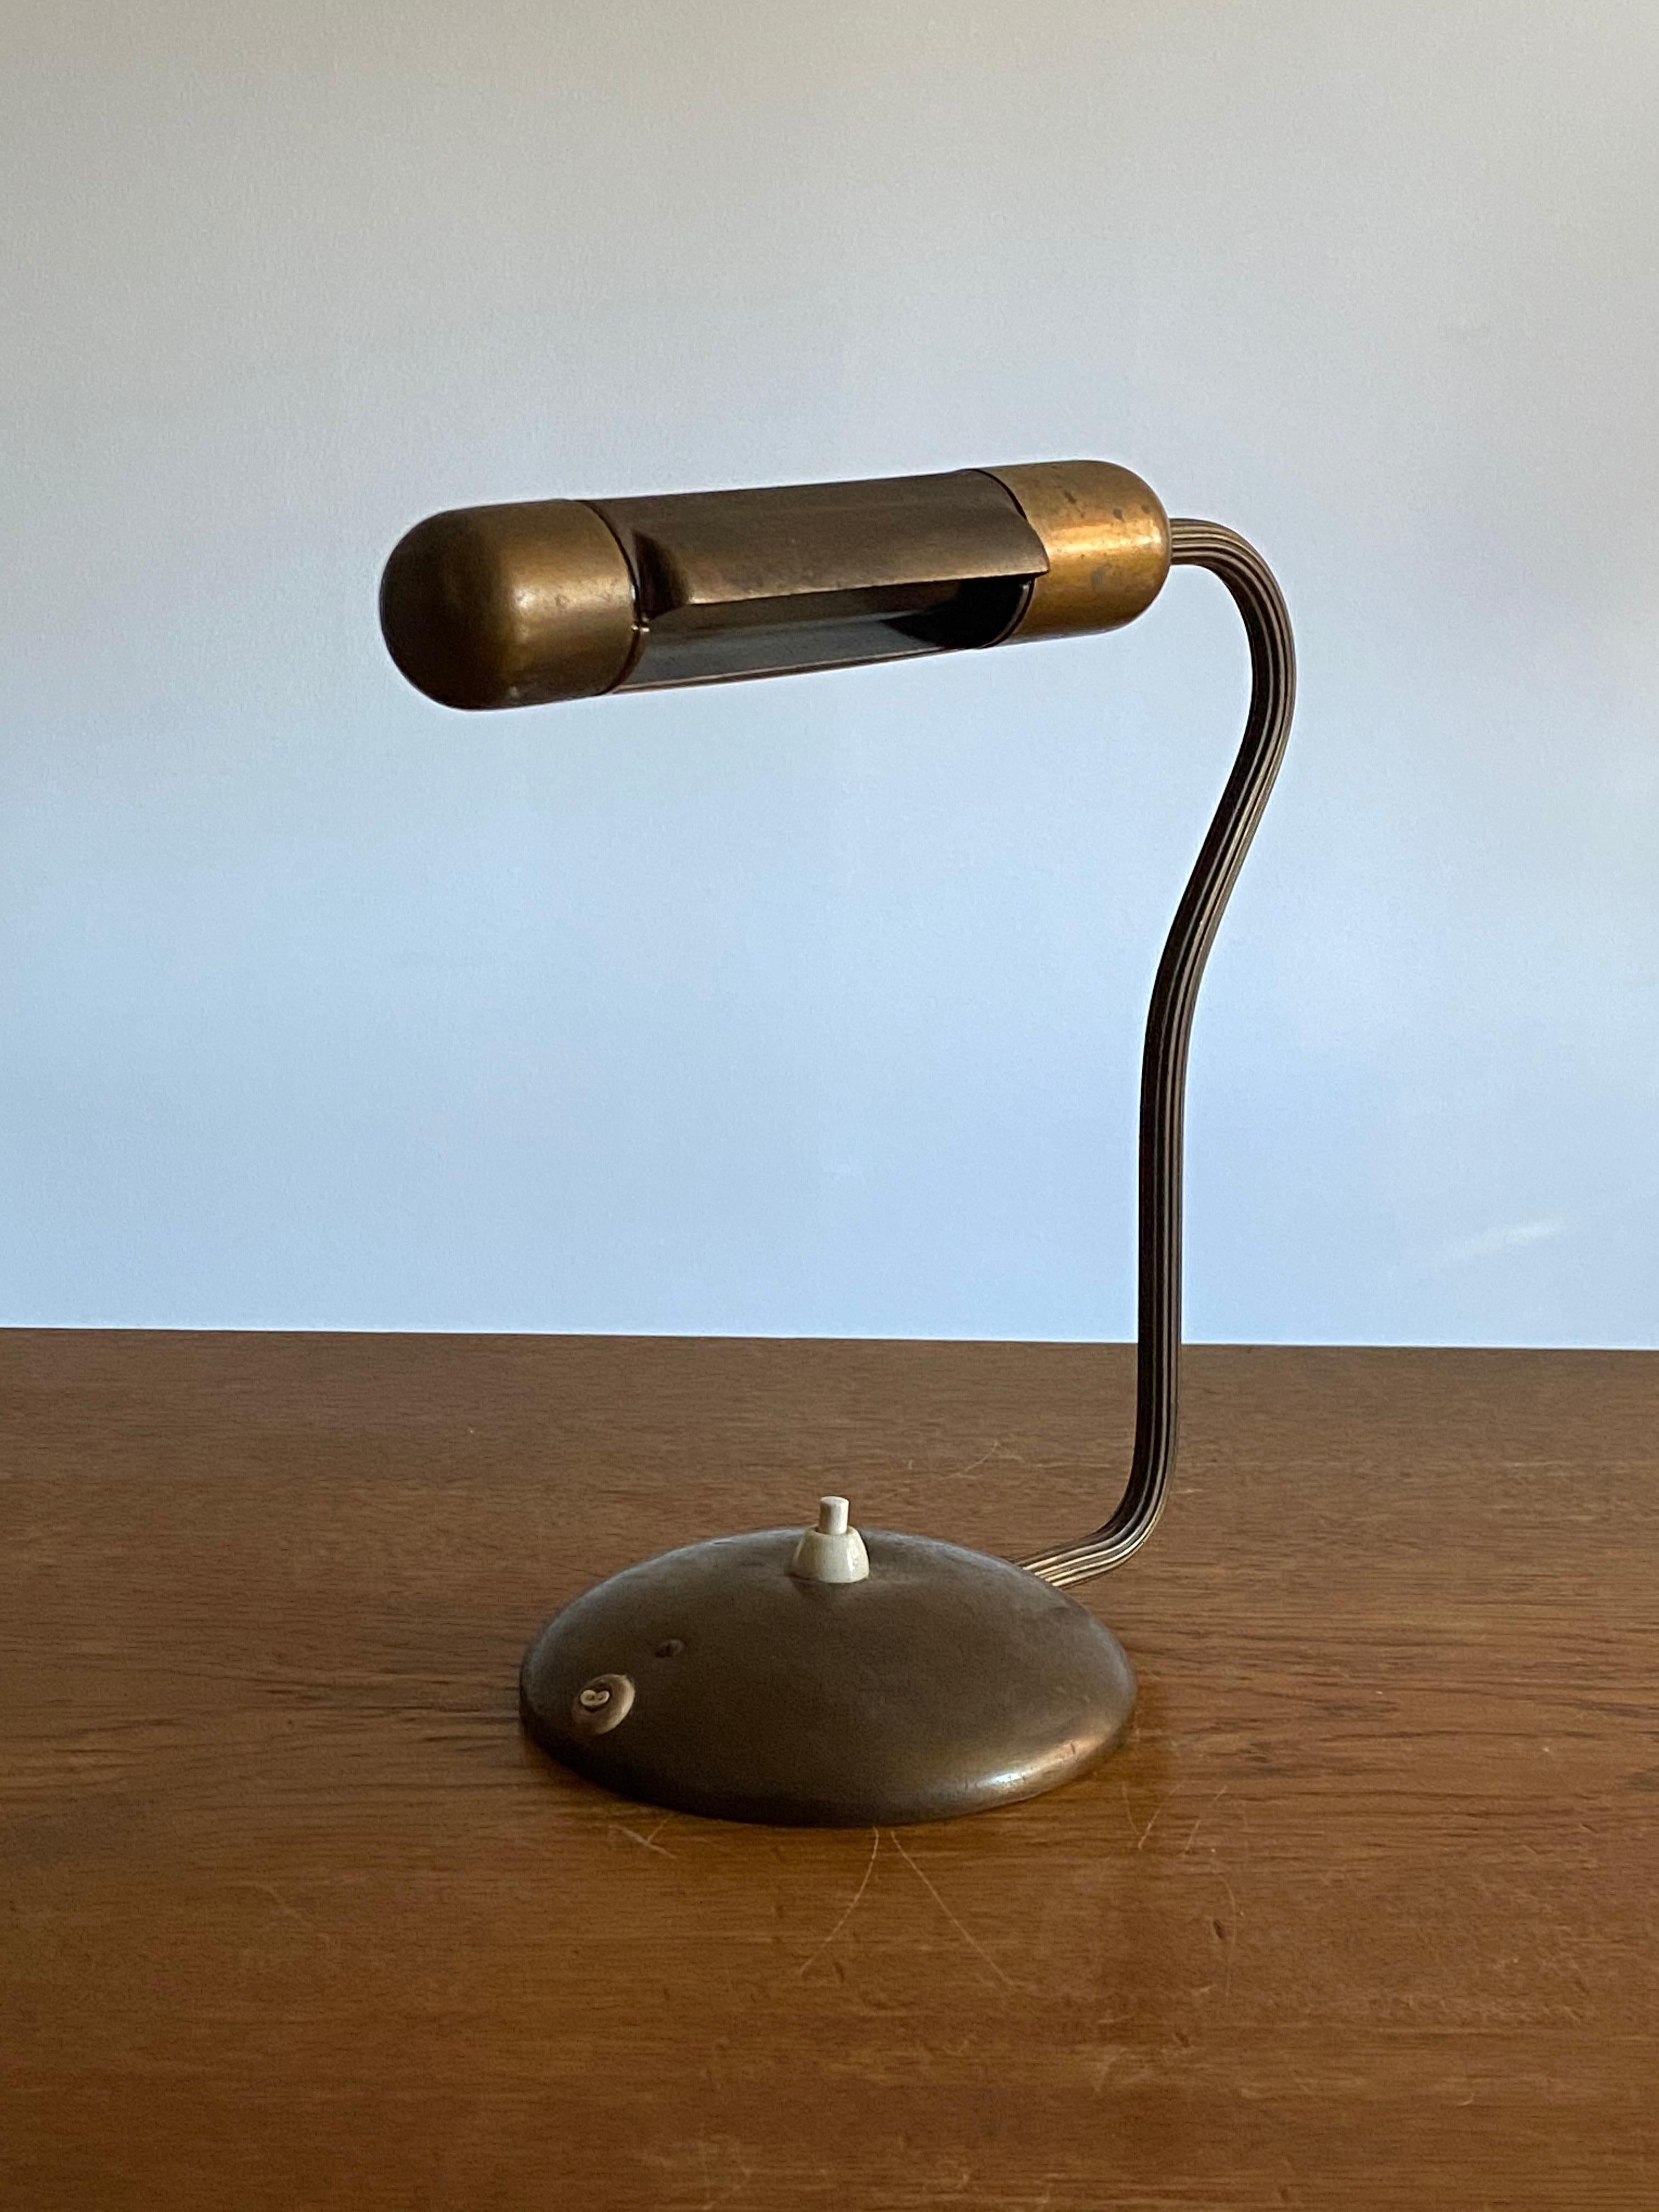 A rare and early functionalist desk lamp / table lamp. Produced by ASEA, Sweden, 1940s. In brass. Stamped.

Since being photographed the lamp has been rewired.

Other designers of the period include Hans Bergström, Paavo Tynell, Serge Mouille, and